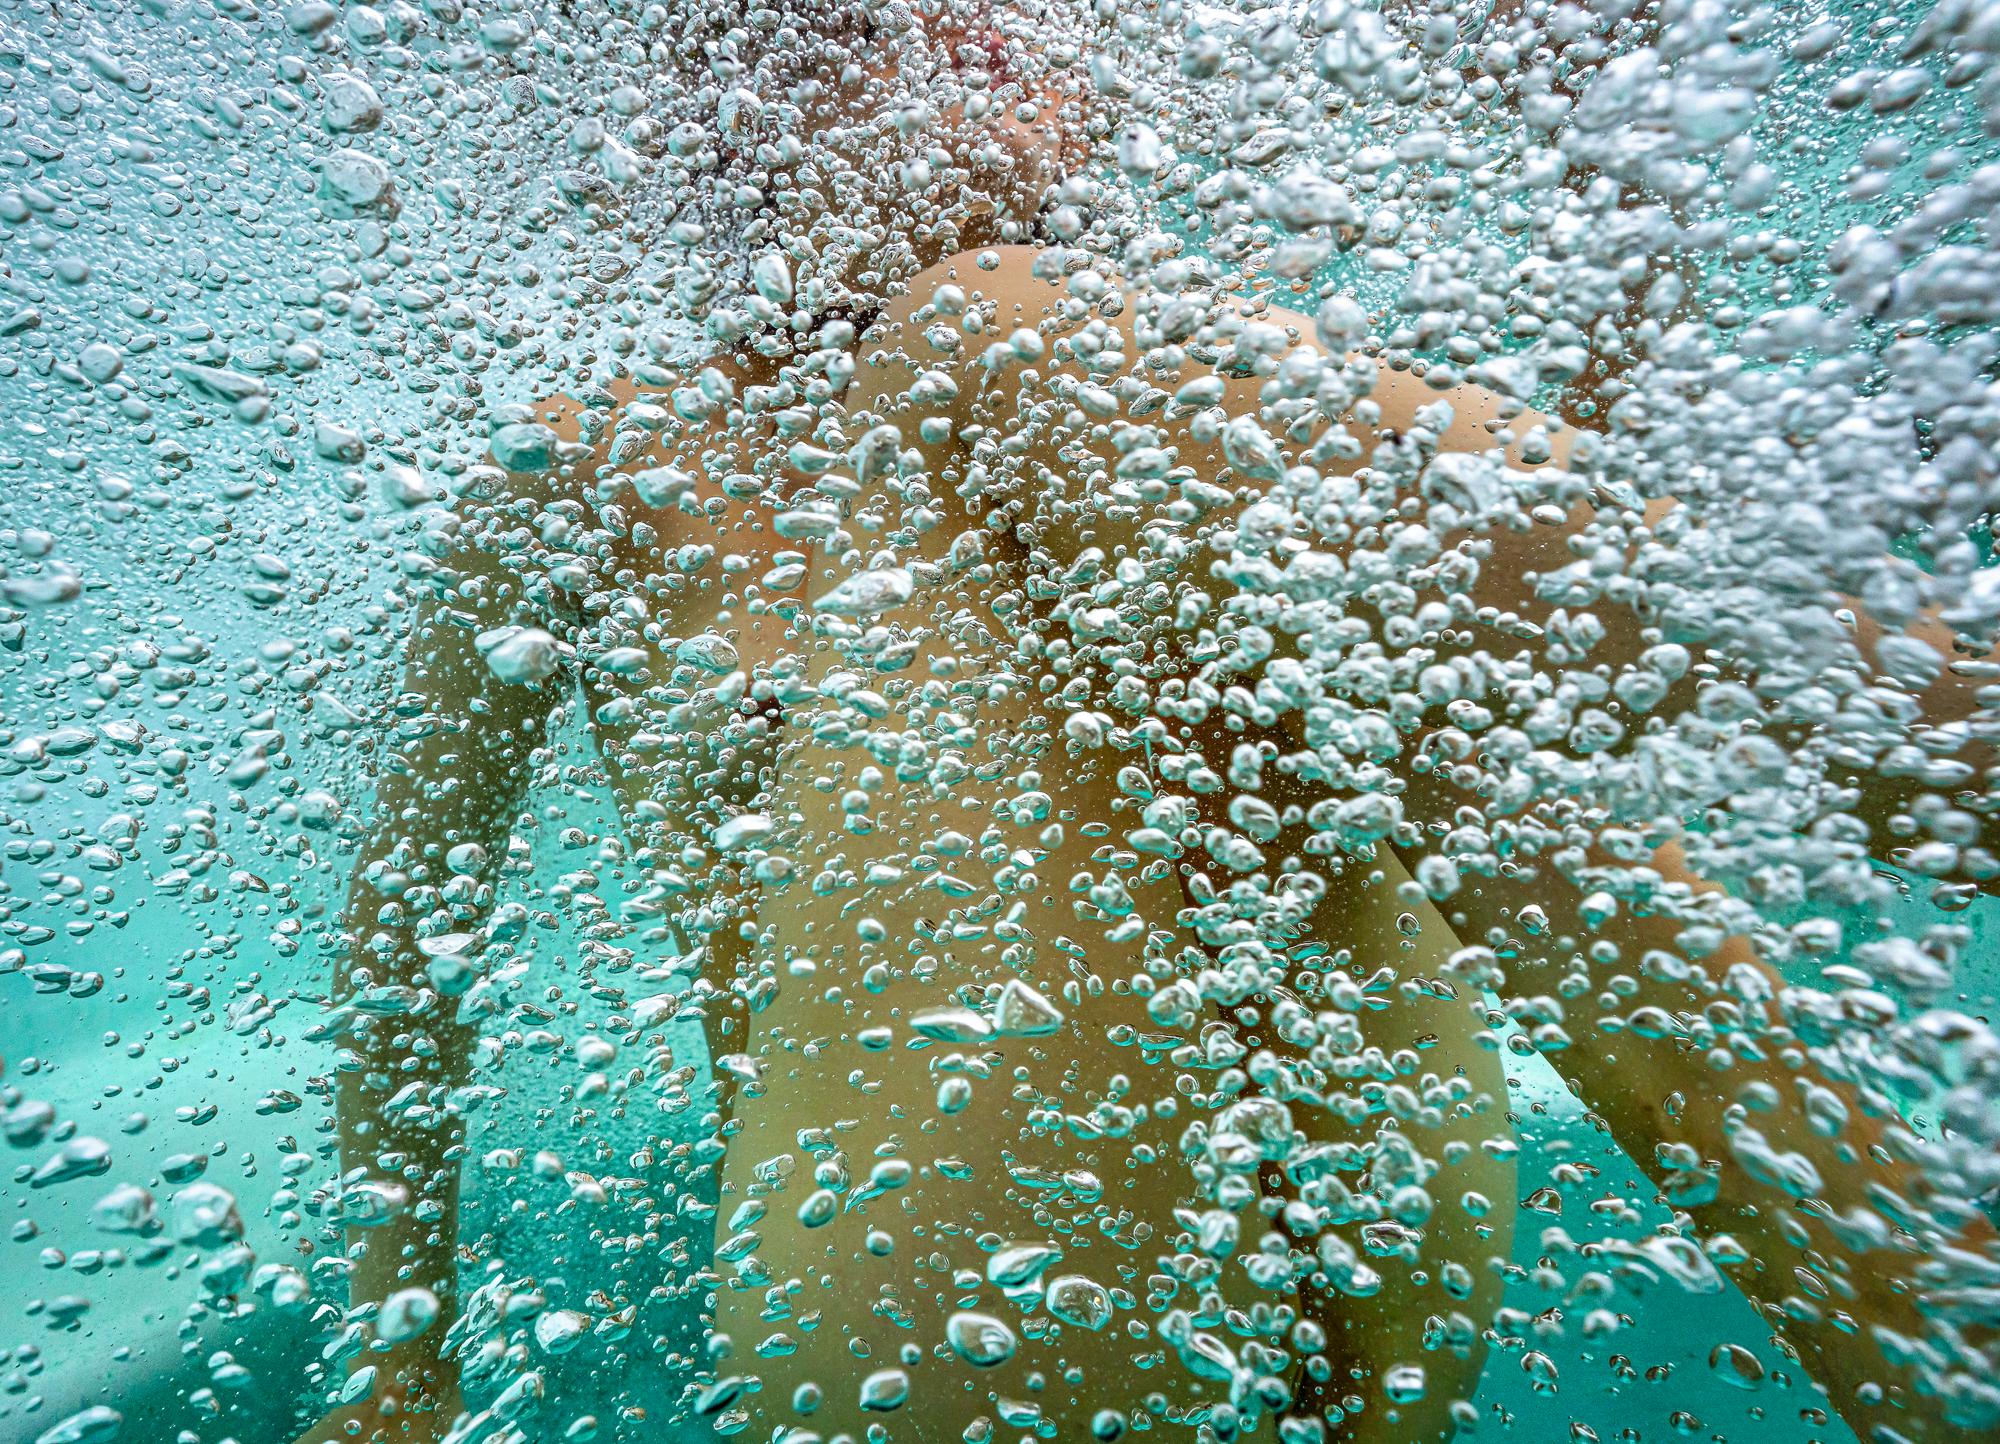 Alex Sher Nude Photograph - Hot Champagne  - underwater nude photograph - print on aluminum 8 x 12"